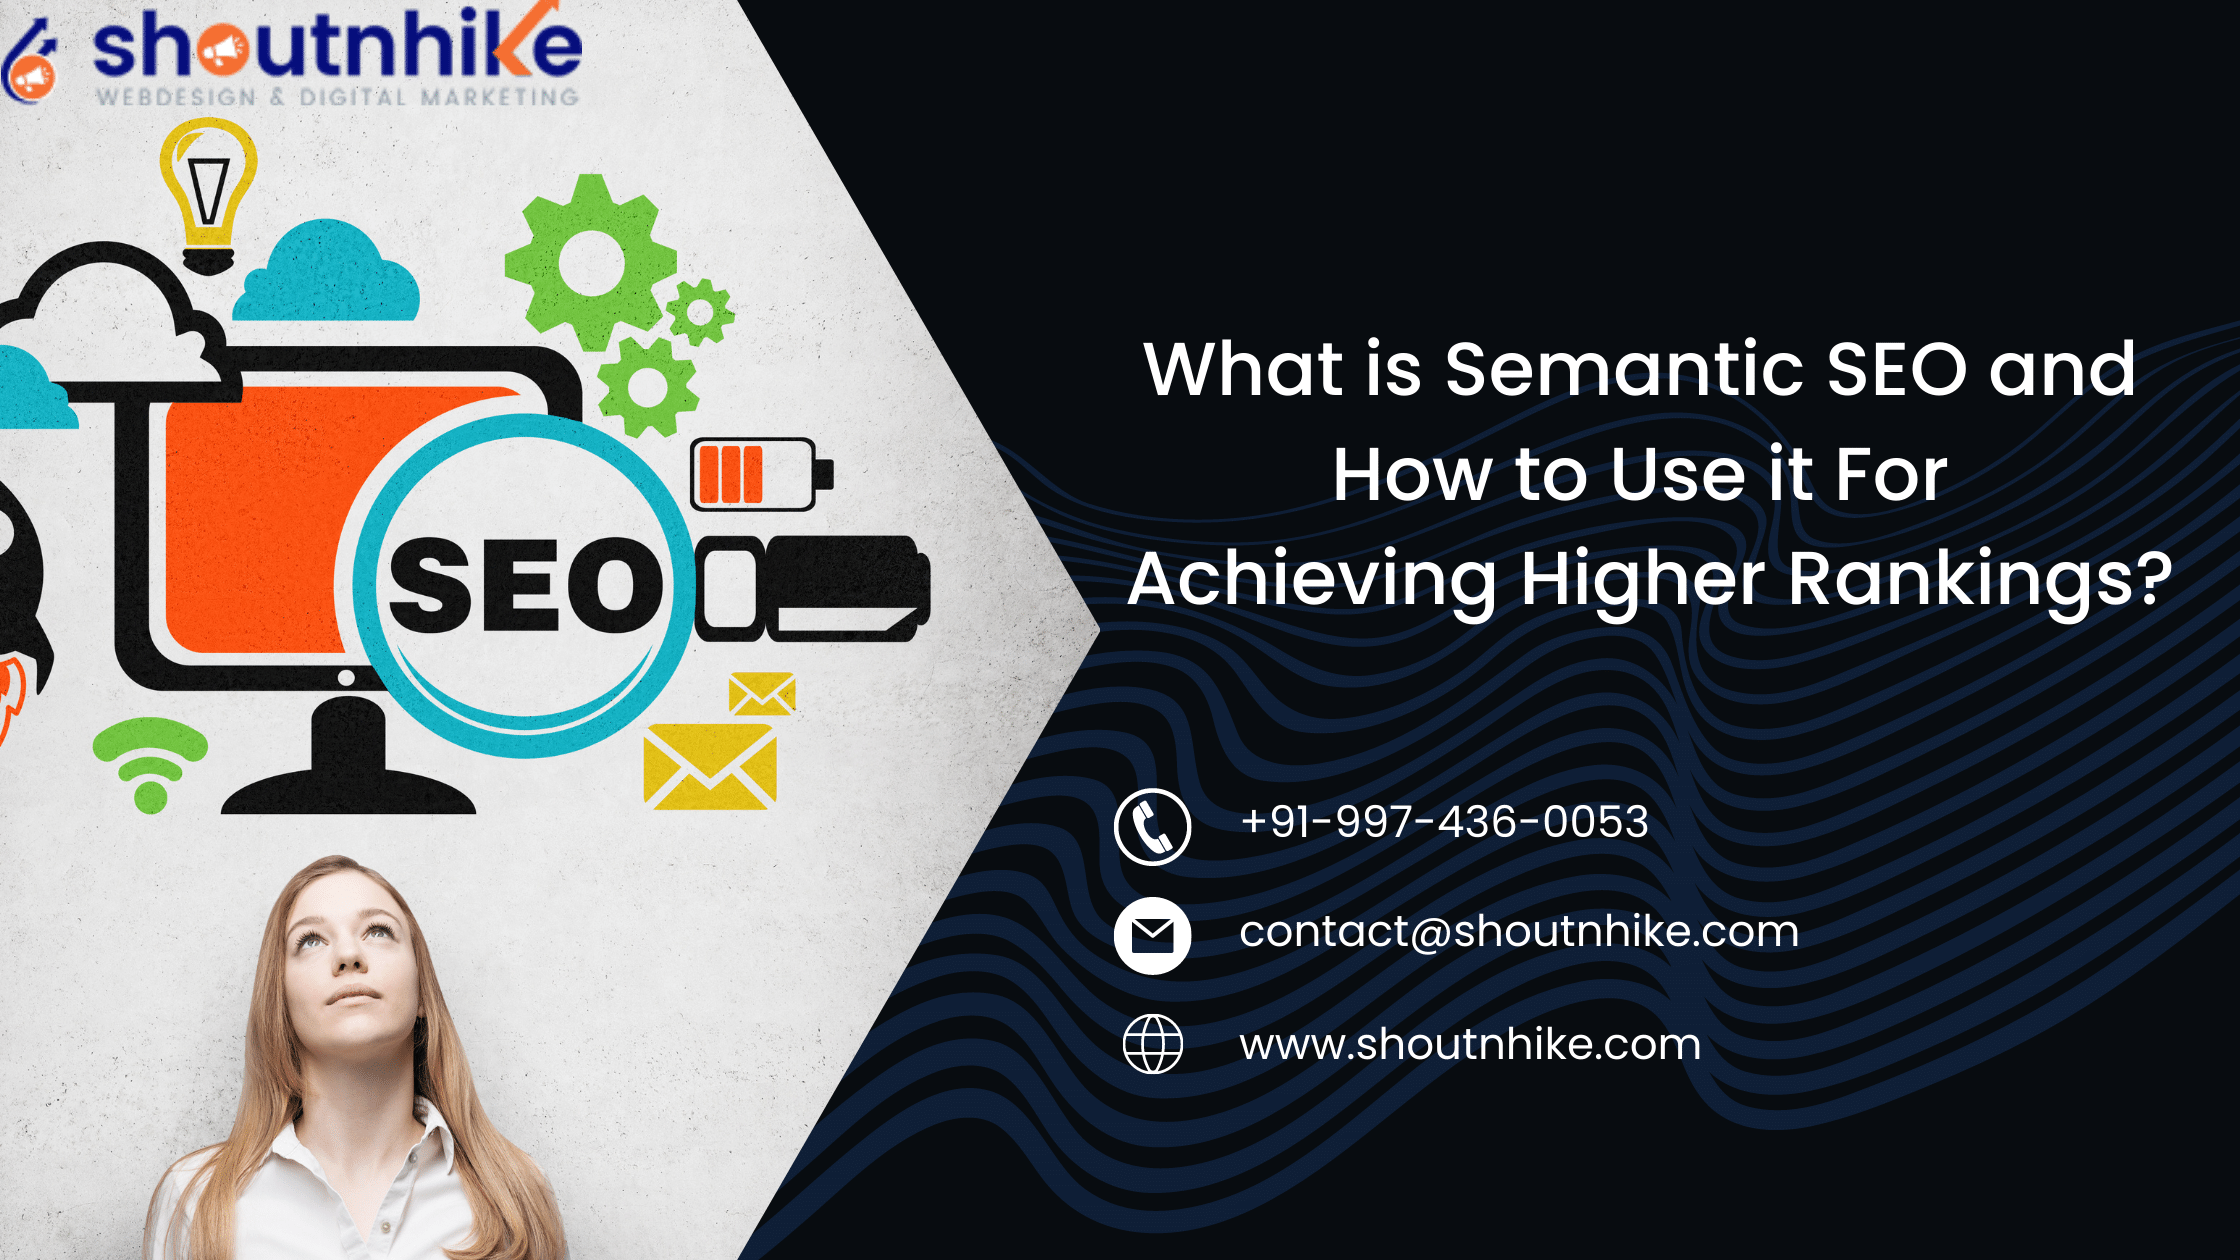 What is Semantic SEO and How to Use it For Achieving Higher Rankings